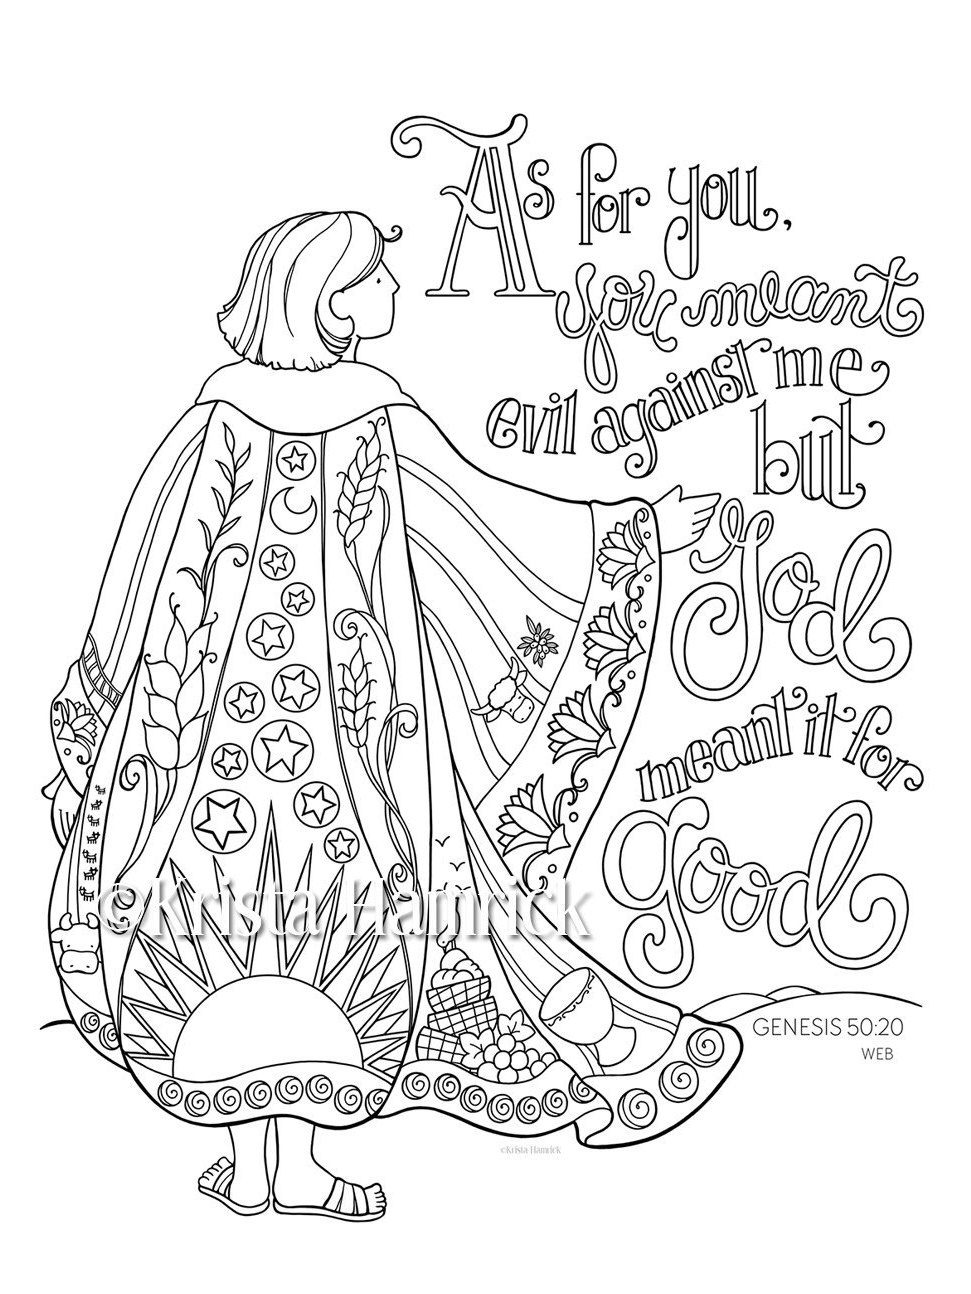 Download Joseph's Coat of Many Colors coloring page 8.5X11 Bible | Etsy